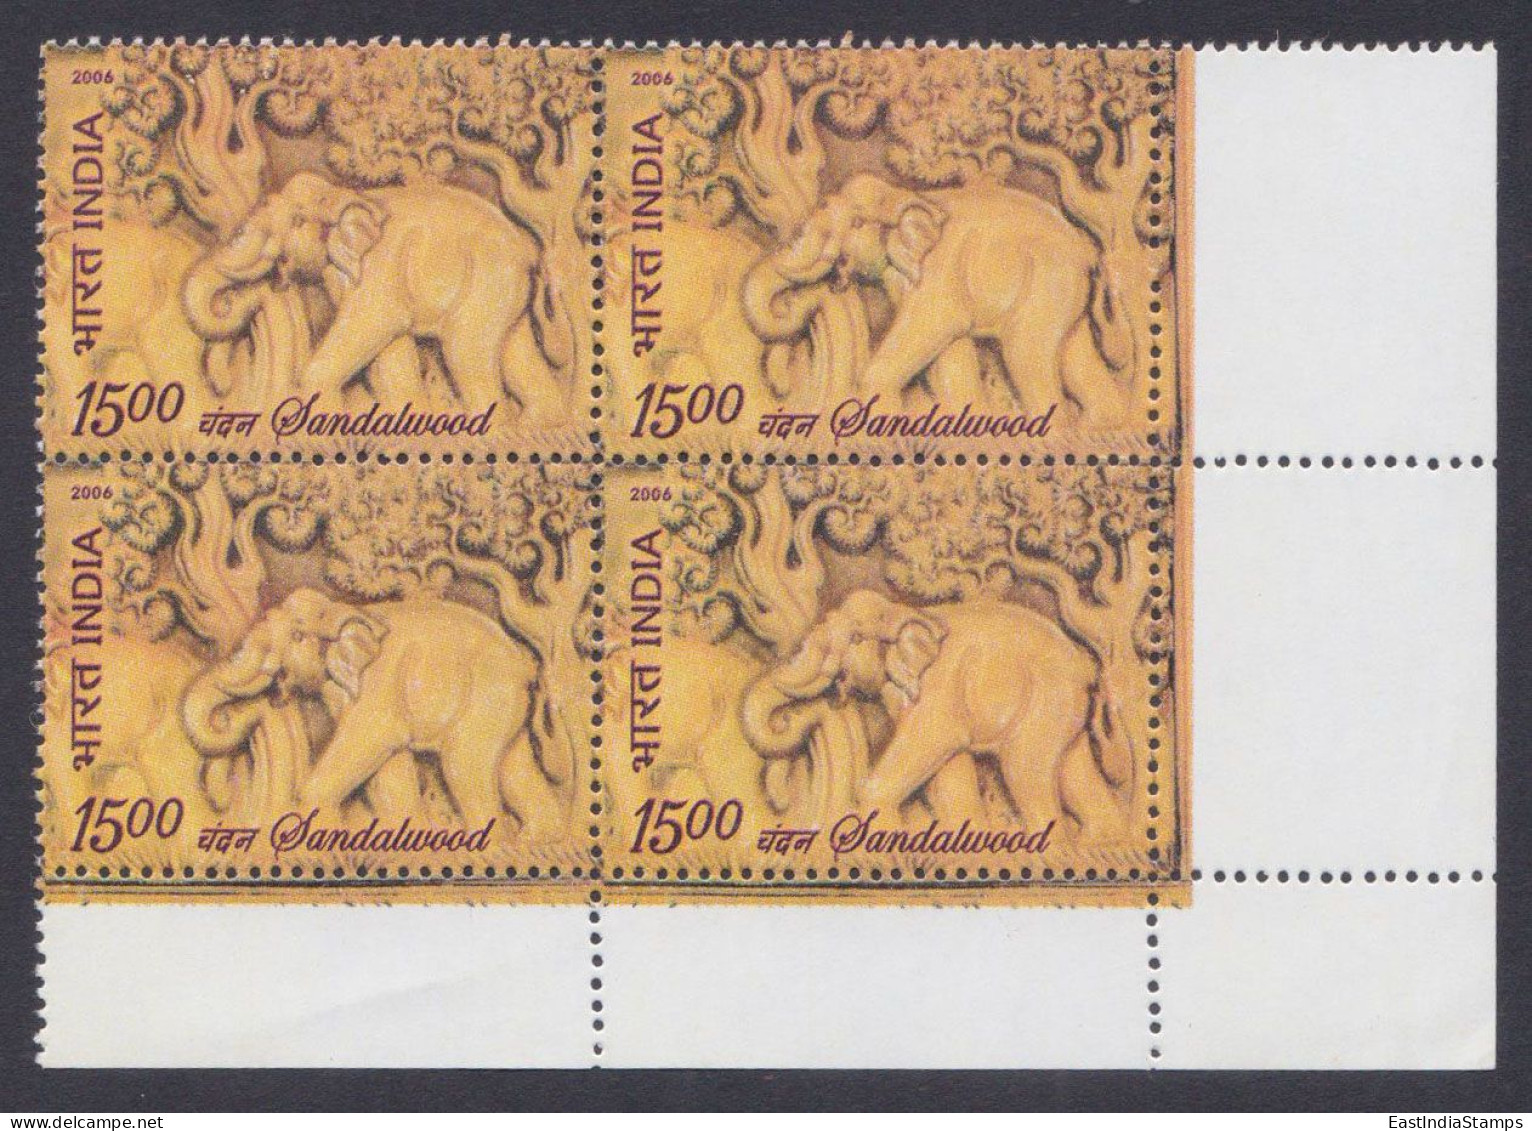 Inde India 2006 MNH Sandalwood, Scented Stamp, Elephant, Scupture, Scented Wood, Scent, Perfume, Block - Nuovi